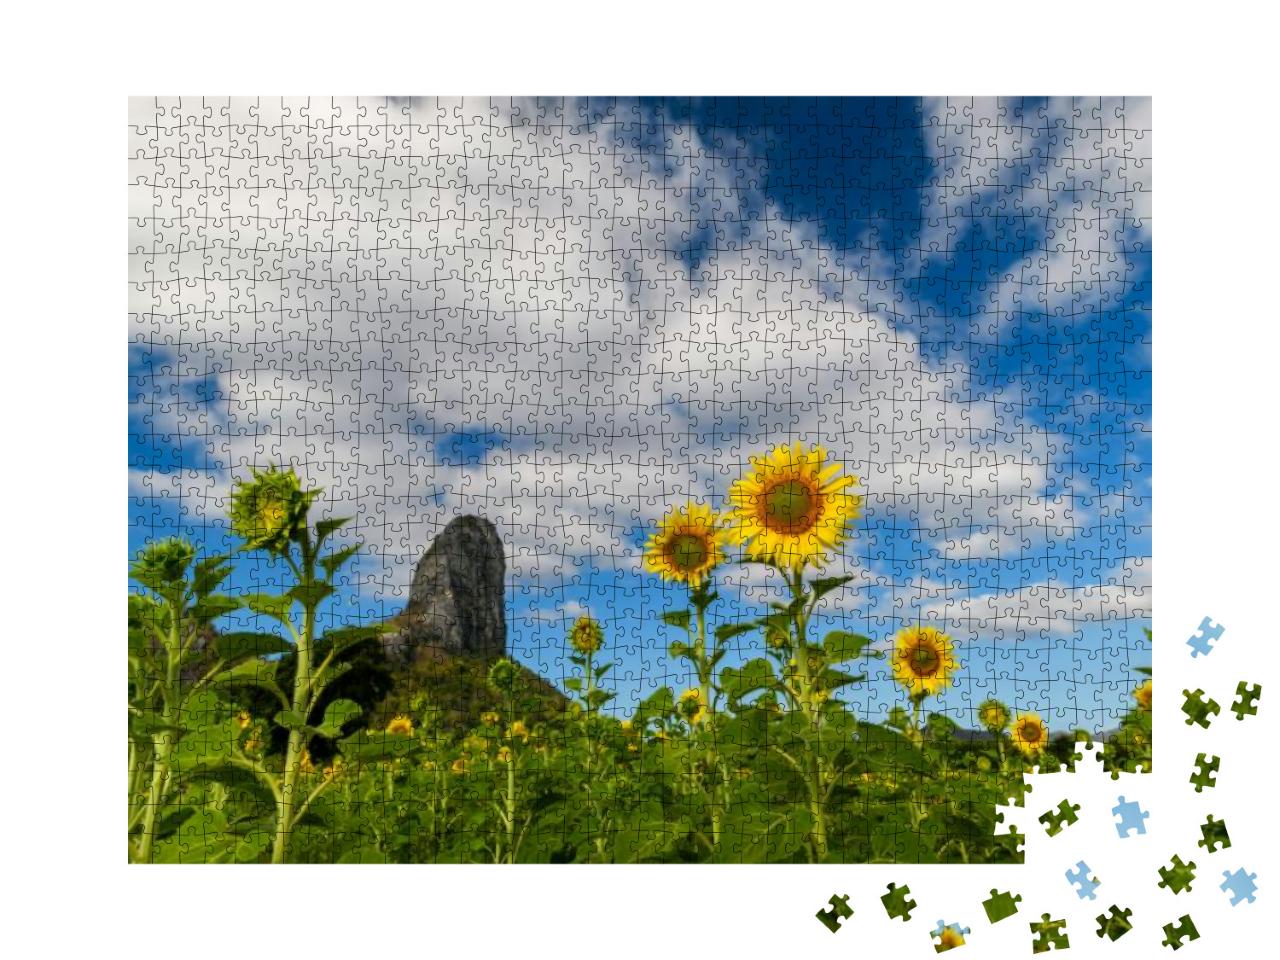 Sunflowers is Blooming in the Sunflower Field with Big Mo... Jigsaw Puzzle with 1000 pieces